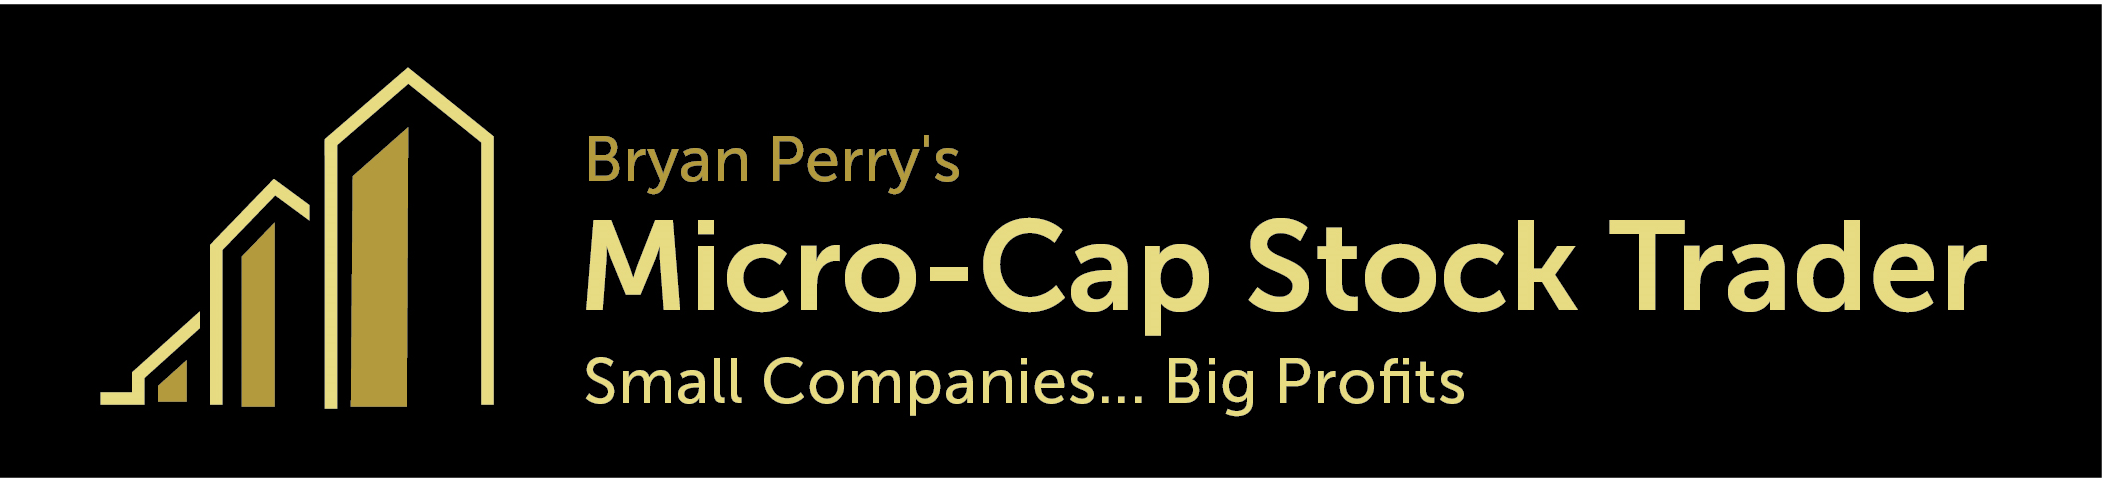 Perry's Micro-Cap Stock Trader